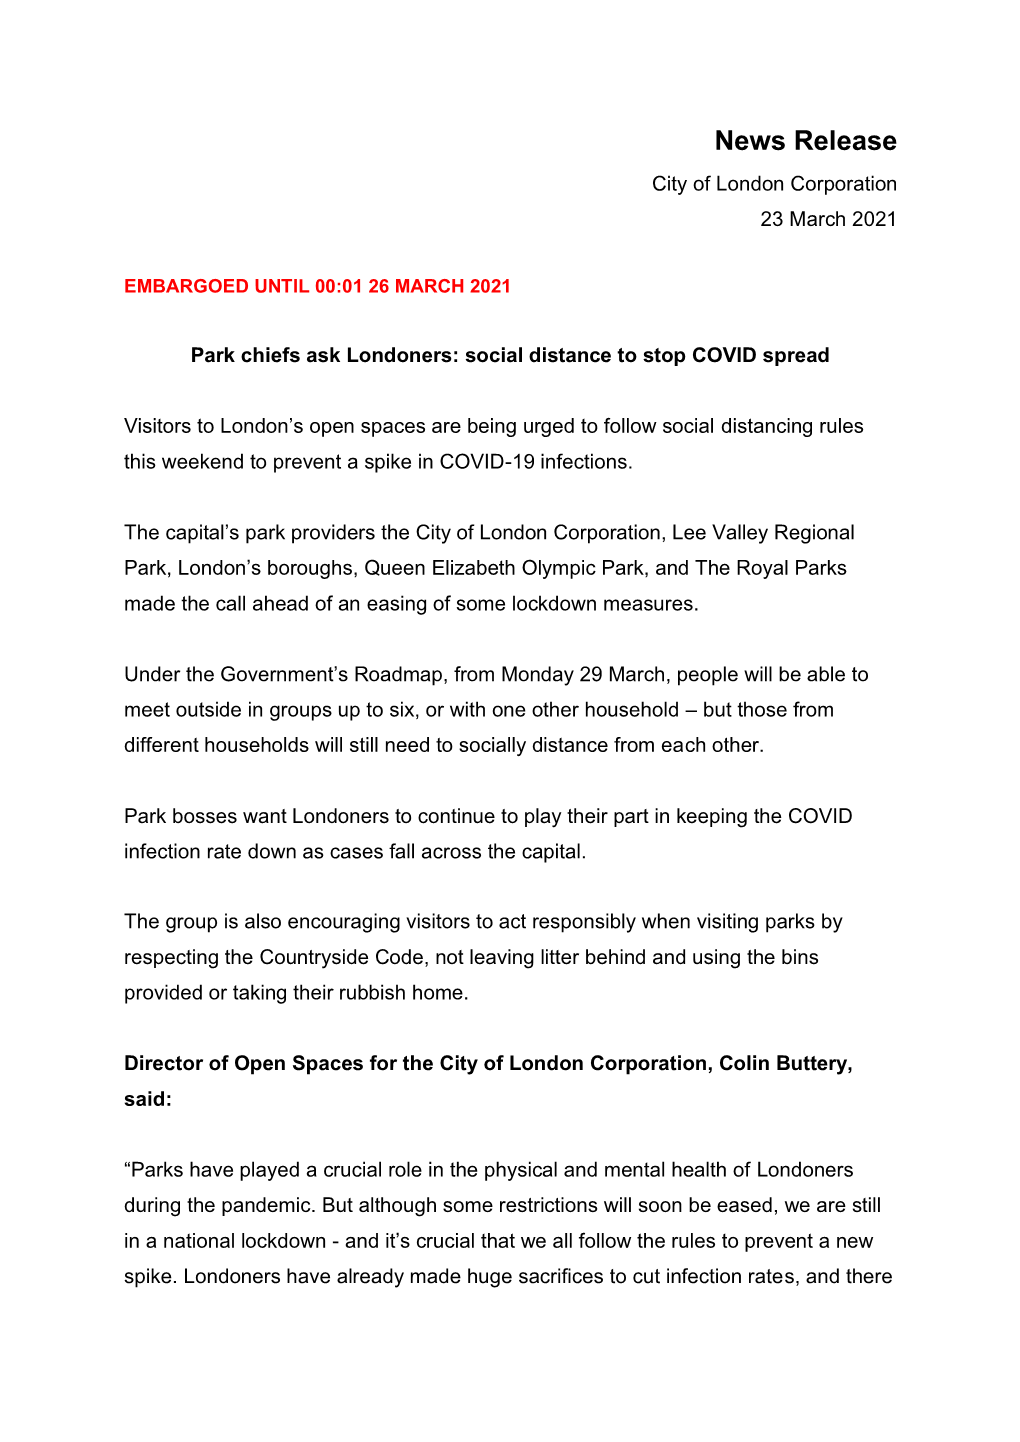 News Release City of London Corporation 23 March 2021